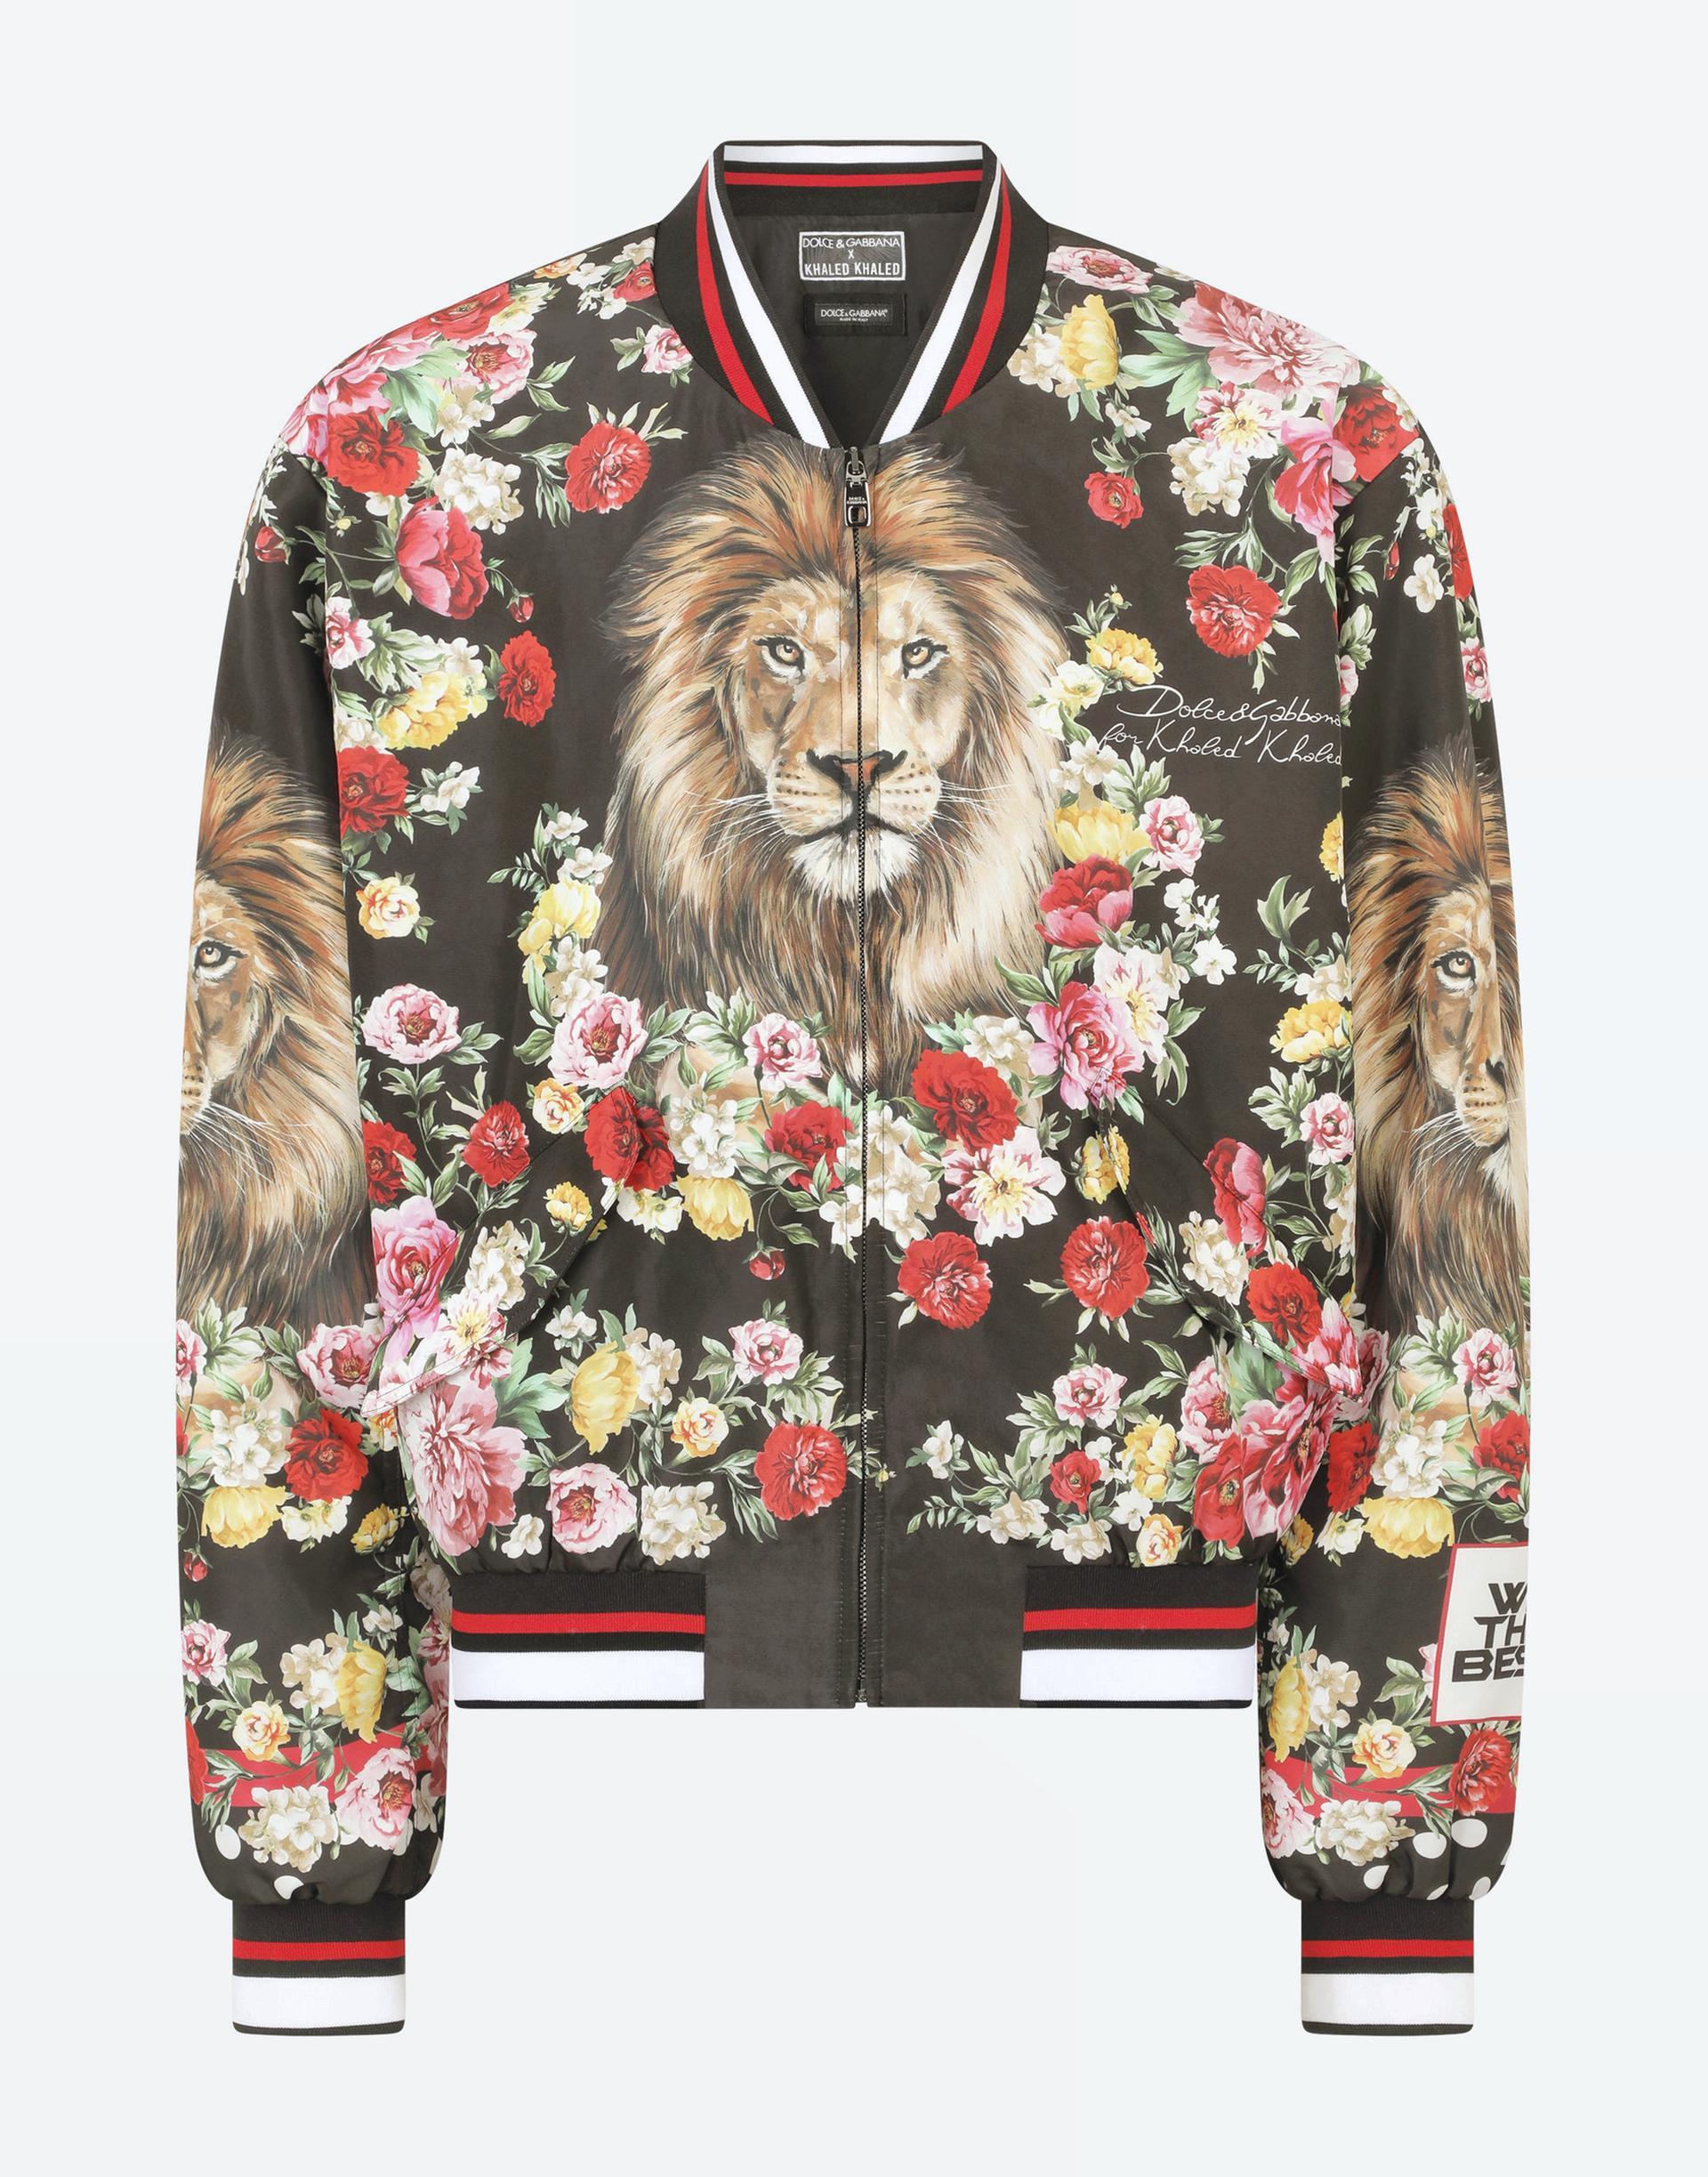 DJ Khaled teams up with Dolce & Gabbana for new collaborative